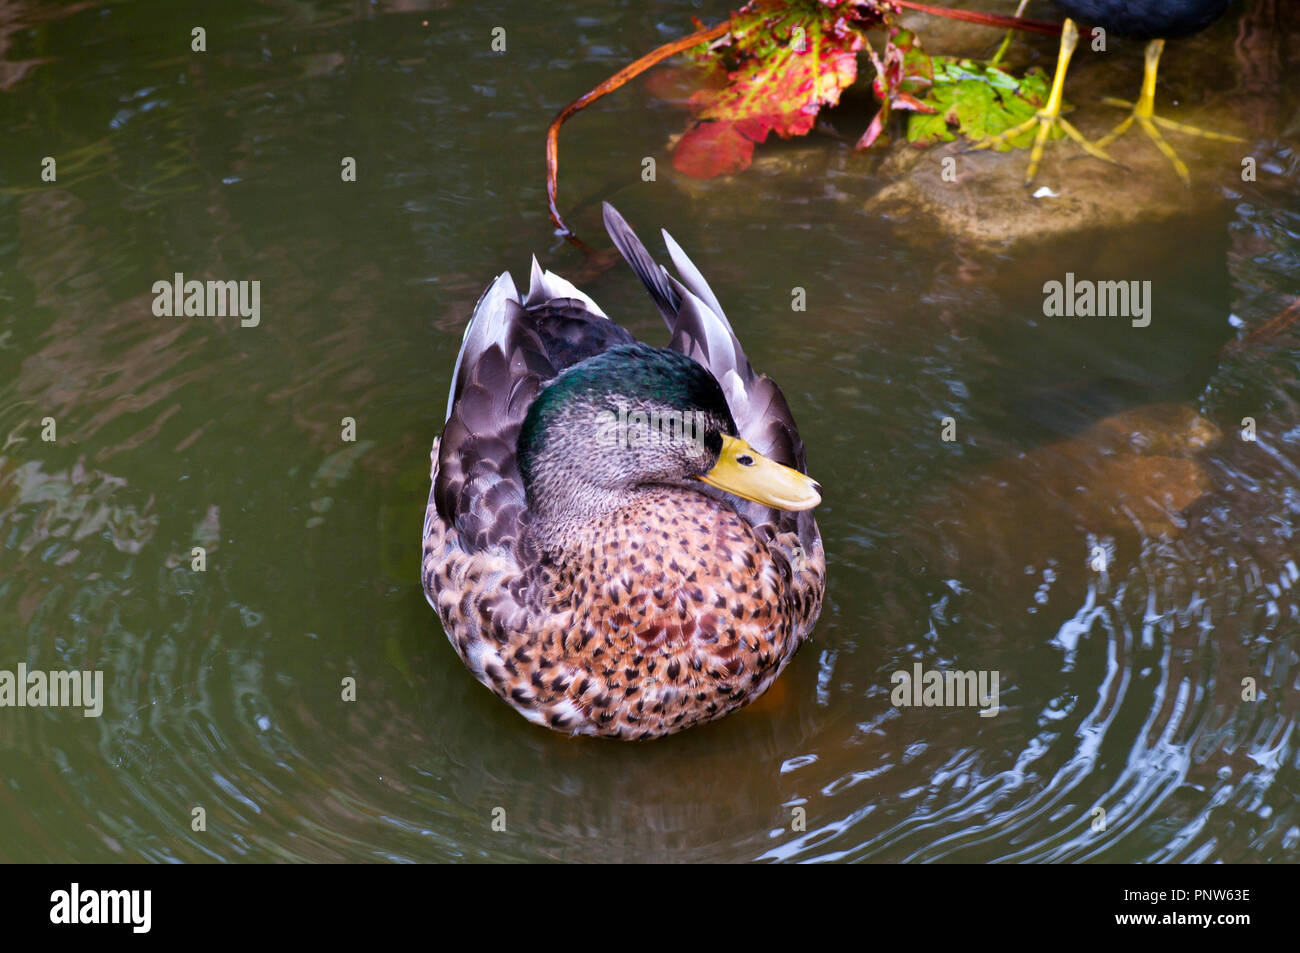 Front View Of An American Black Duck Latin Name Anas rubripes Stock Photo